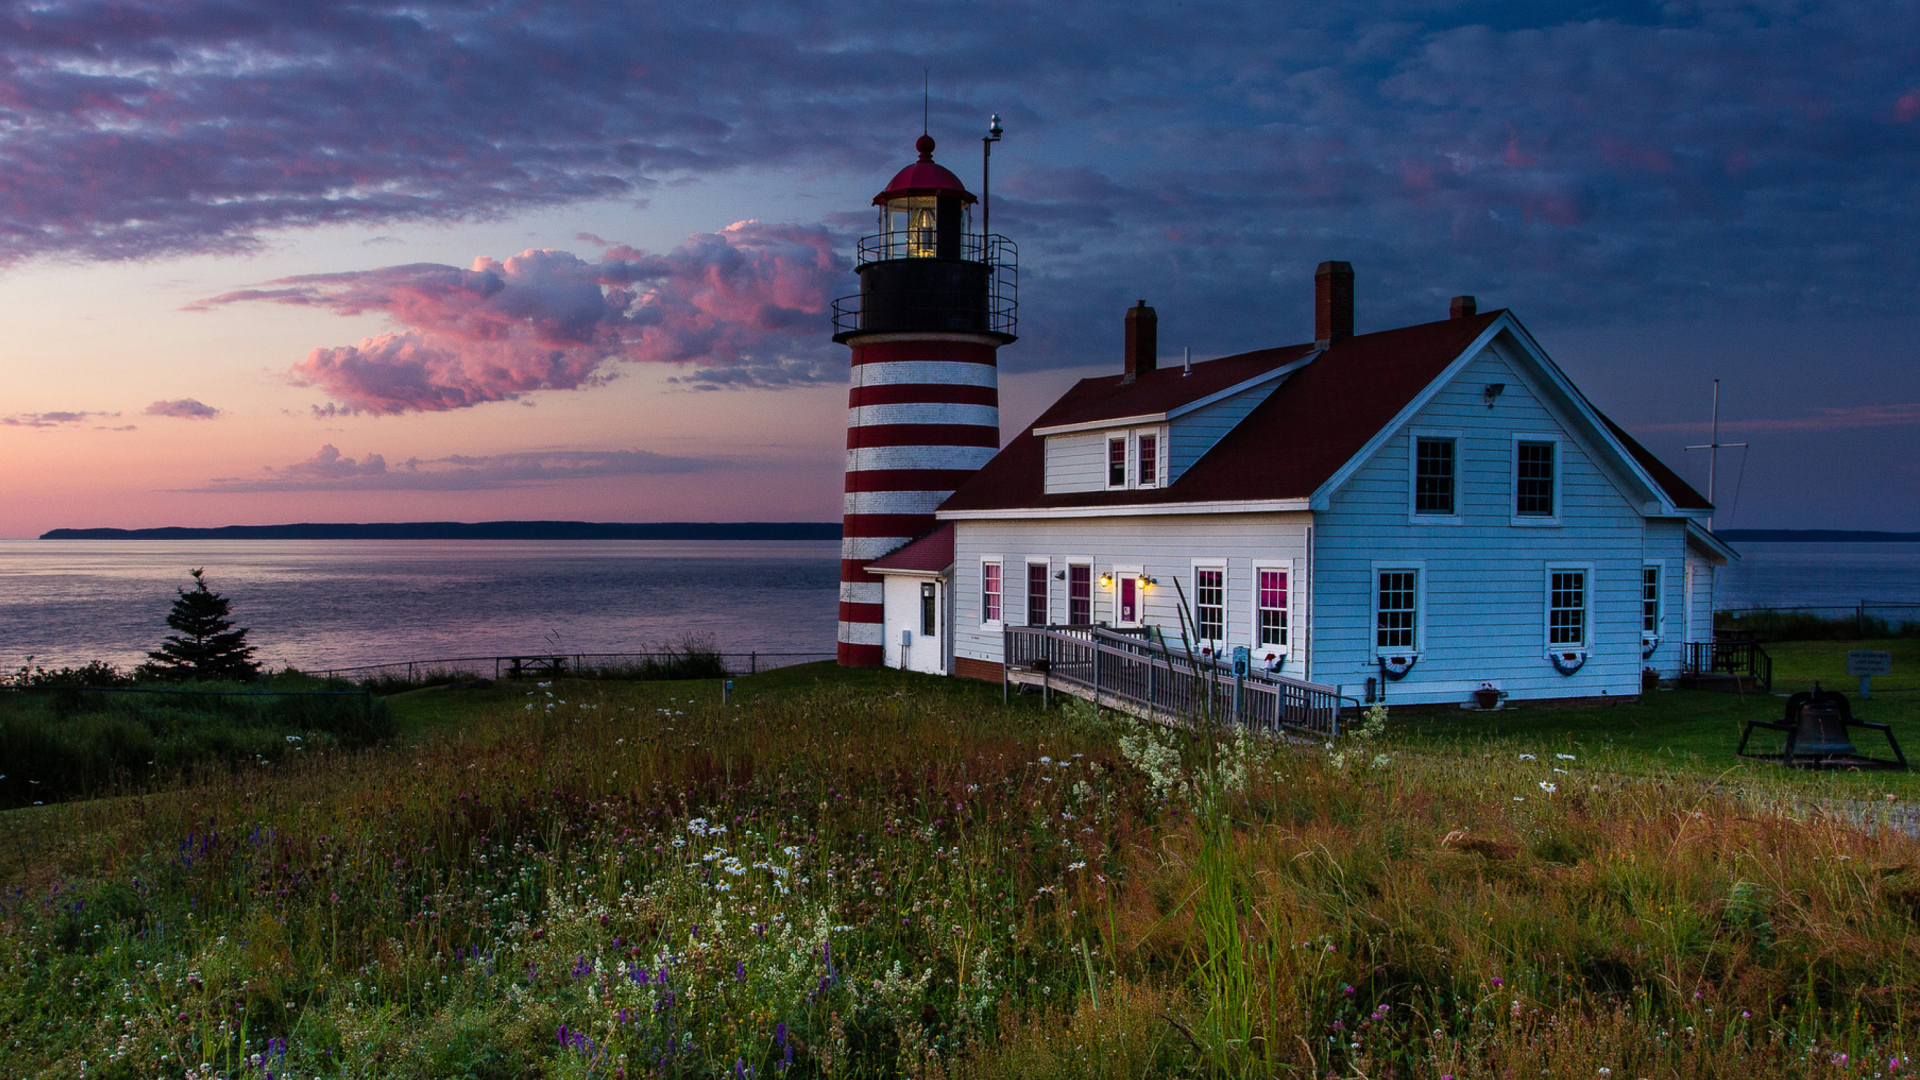 U.S. State Of Maine Lighthouse wallpaper 1920x1080